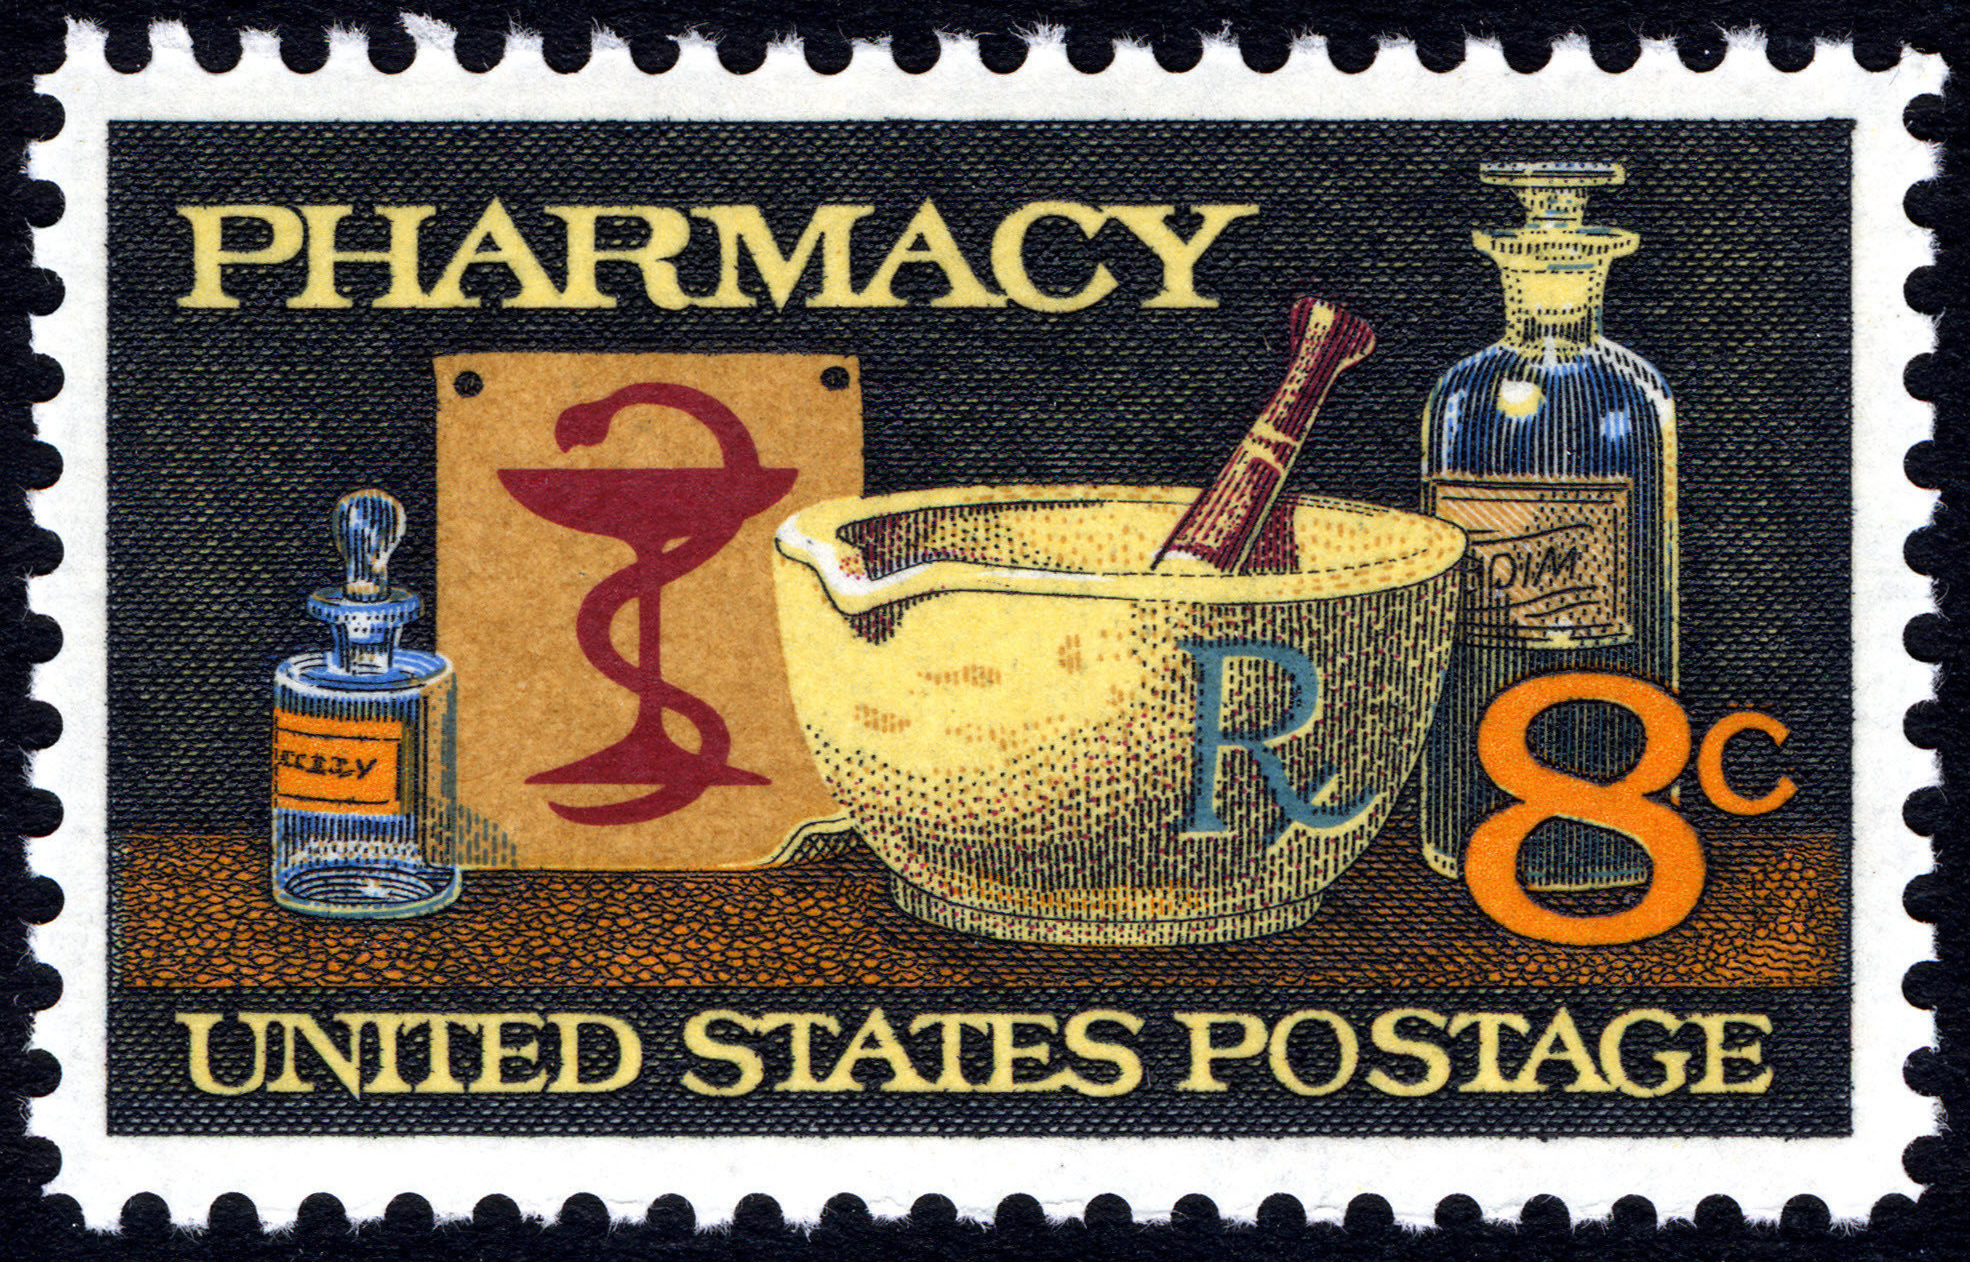 Beautiful Version Pharmacist 1972 Pharmacy United States 8-cent Stamp Metal Pin 